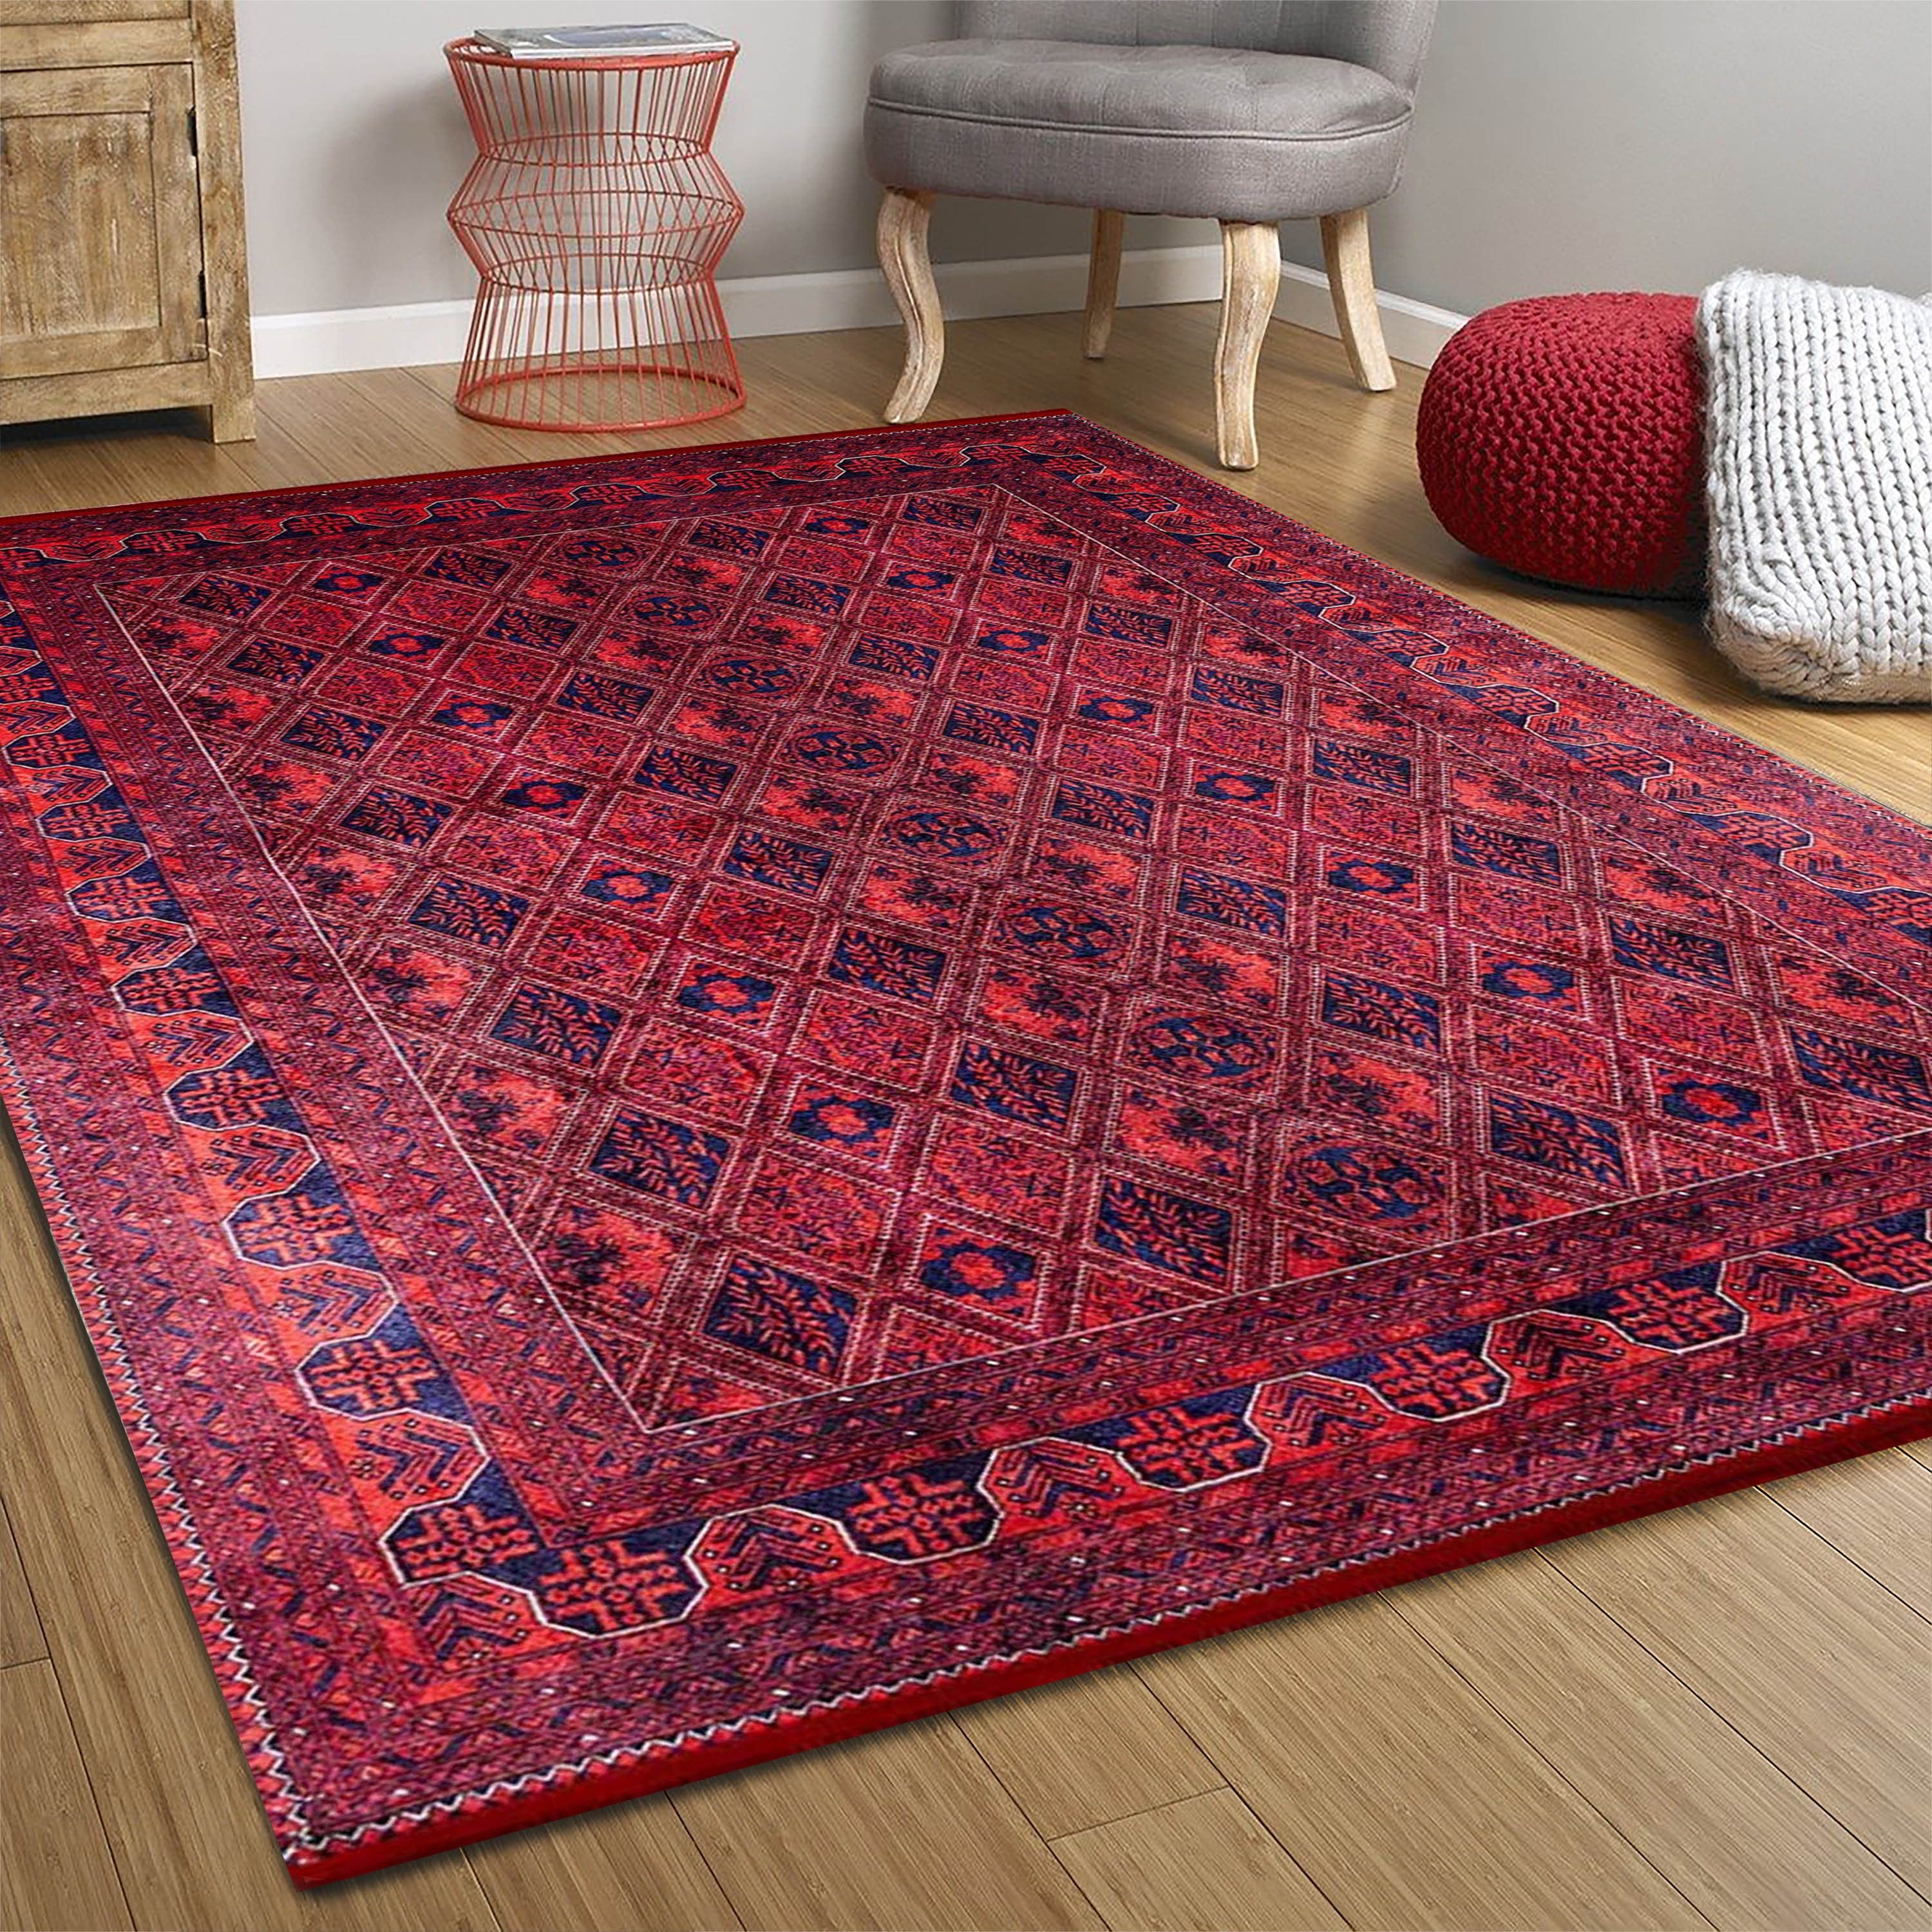 Afghan Rug Burgundy Red Oversized Area Rugs 10X13 9X12 8X10 – Etsy For Burgundy Rugs (View 14 of 15)